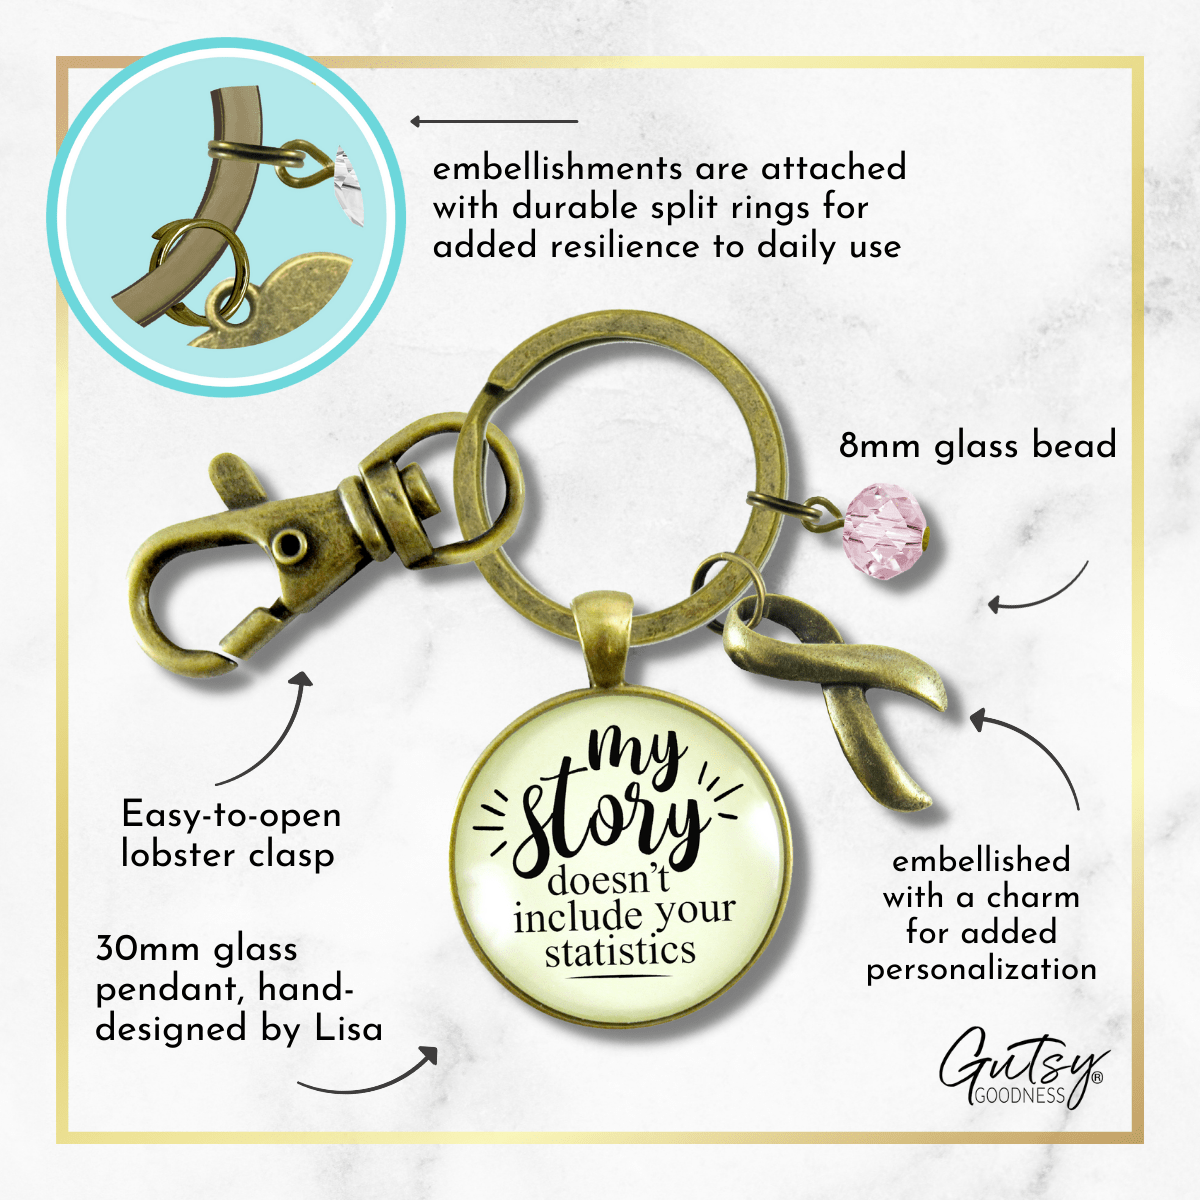 Breast Cancer Keychain My Story Doesn't Include Your Statistics Funny Mantra Gift Pink Awareness - Gutsy Goodness Handmade Jewelry;Breast Cancer Keychain My Story Doesn't Include Your Statistics Funny Mantra Gift Pink Awareness - Gutsy Goodness Handmade Jewelry Gifts